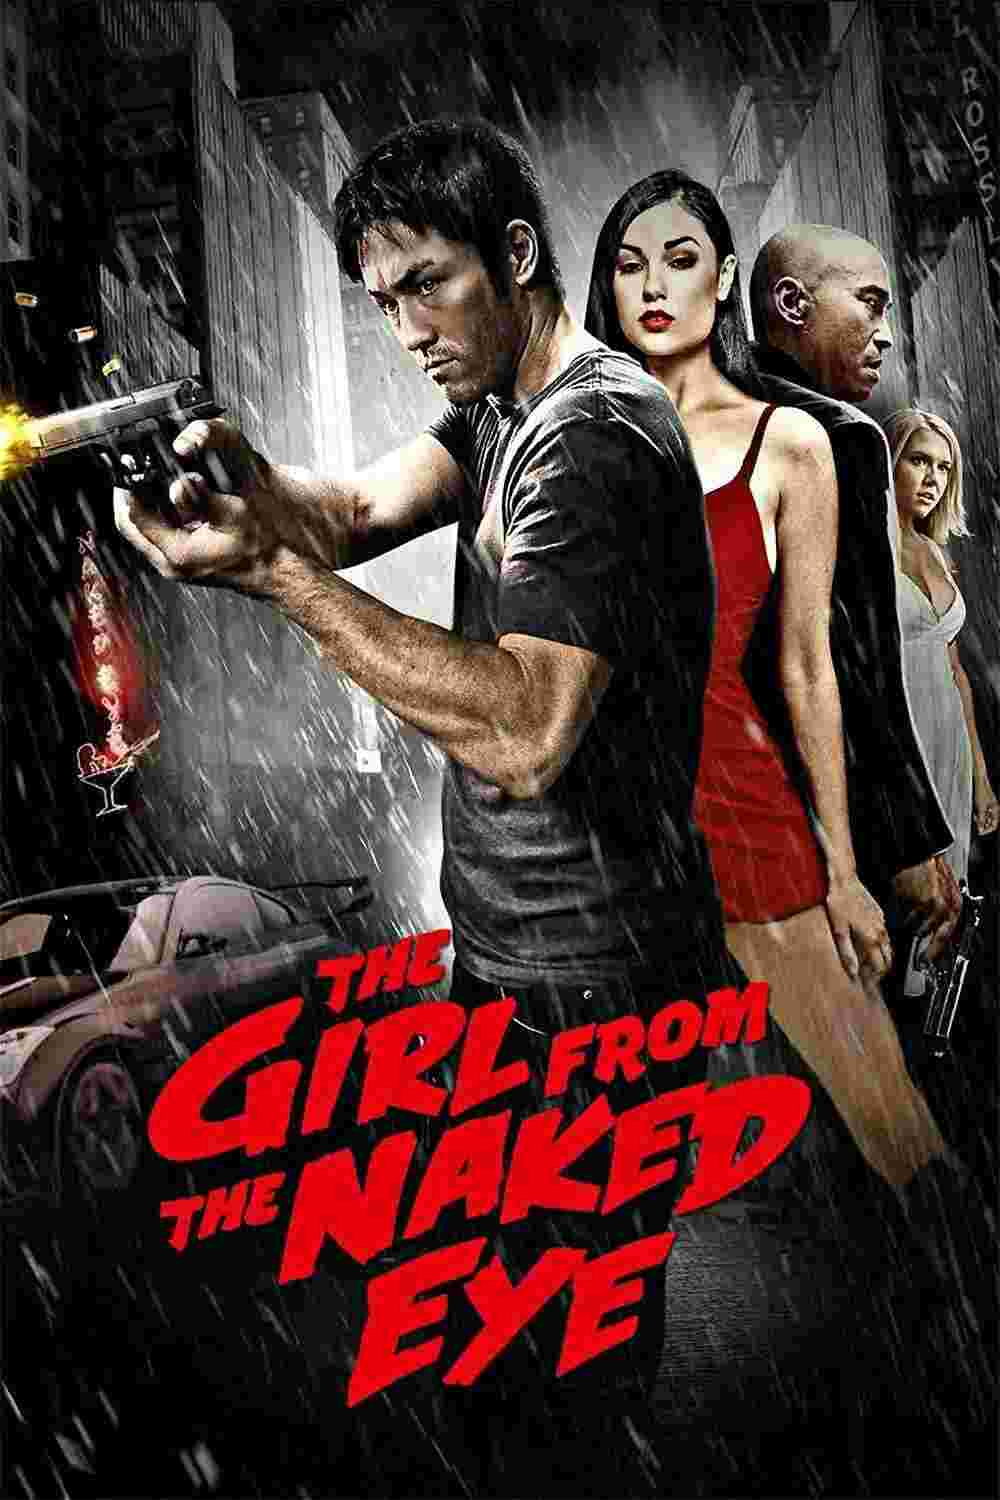 The Girl from the Naked Eye (2012) Jason Yee